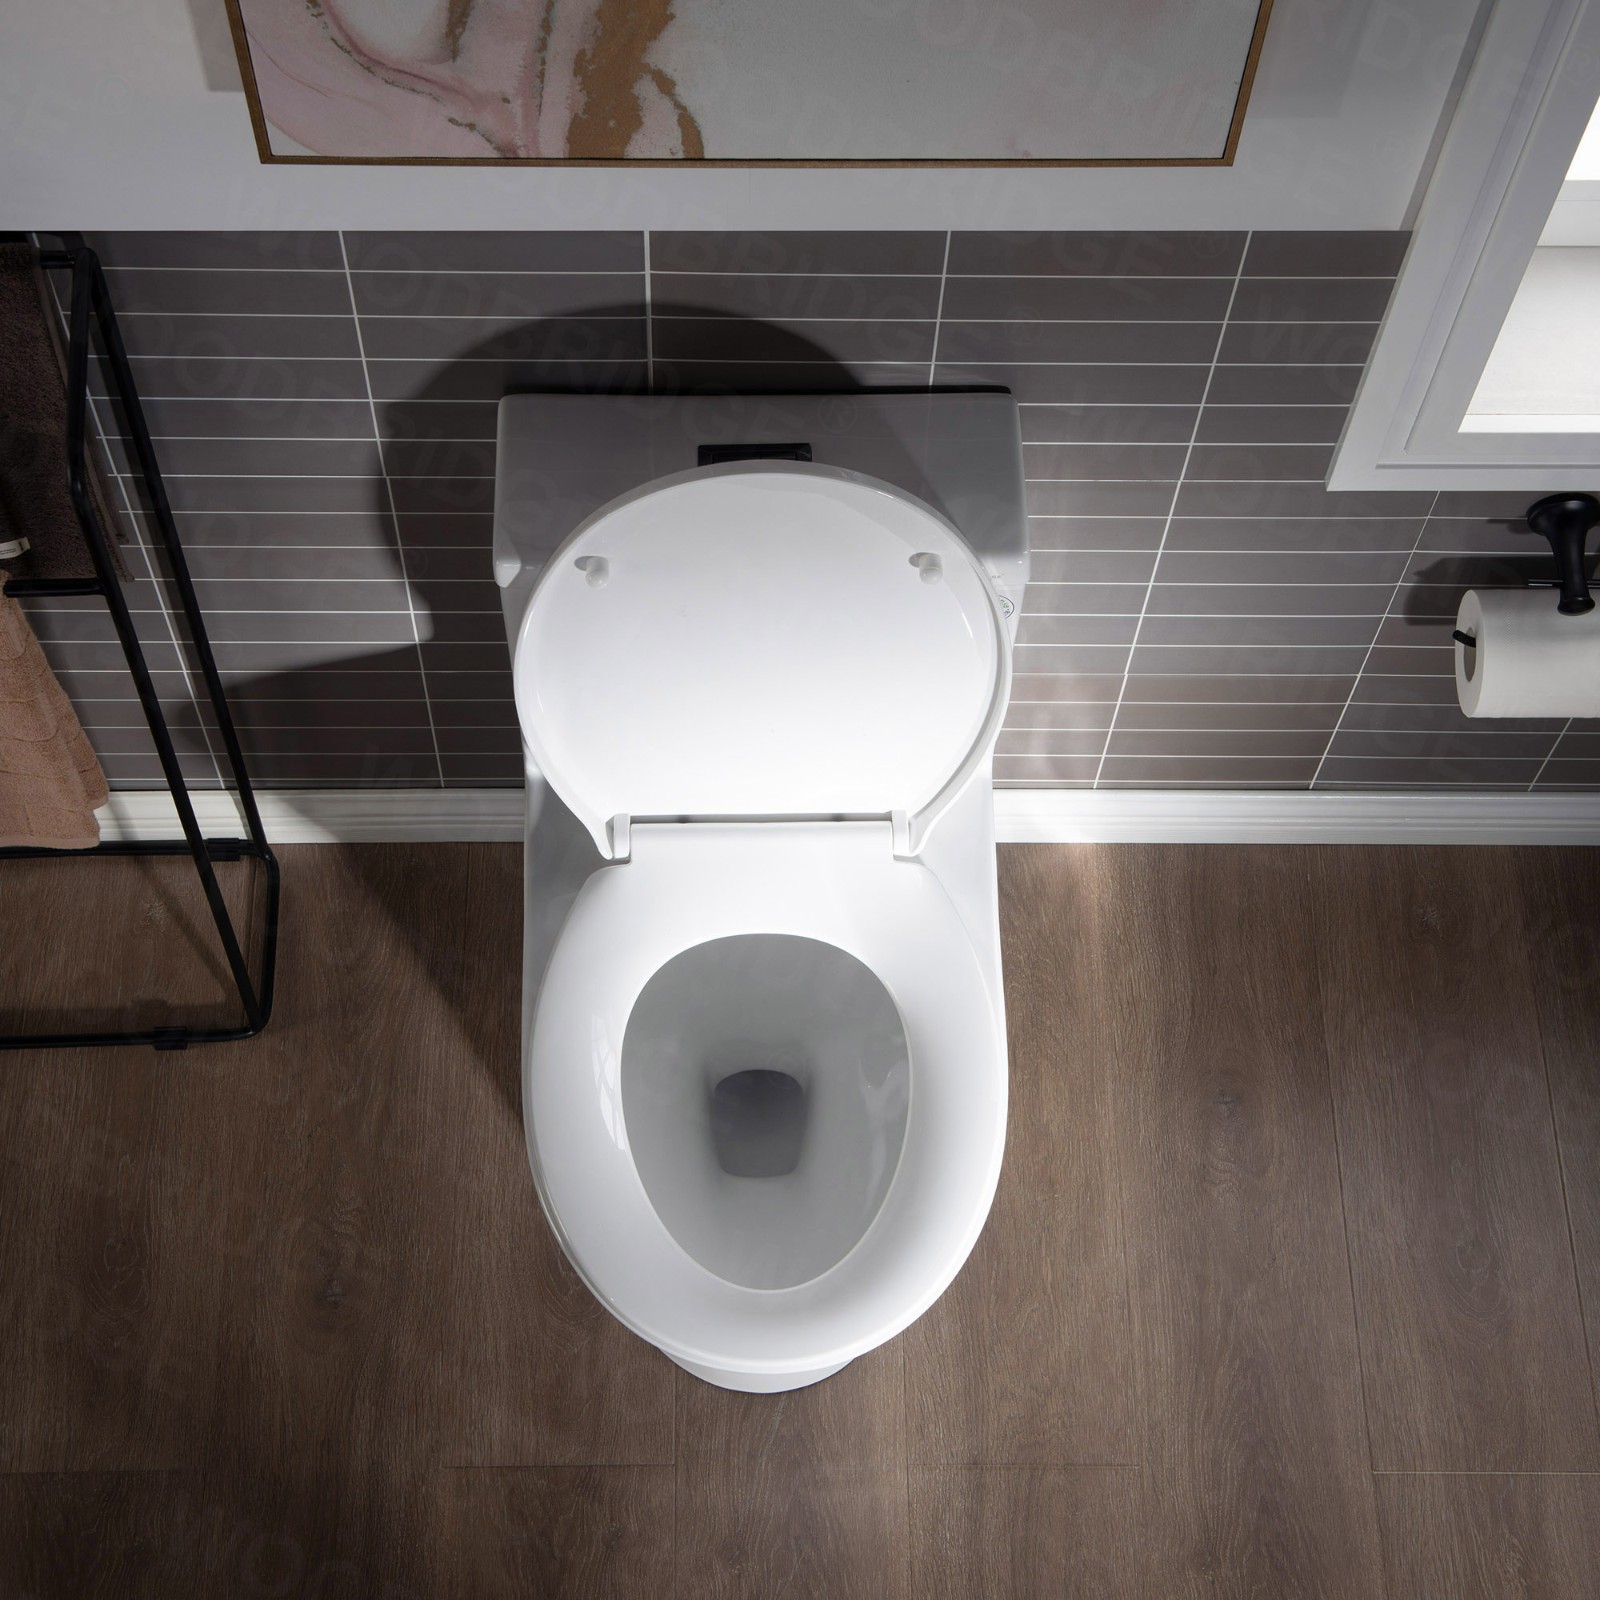  WOODBRIDGE One Piece Short Compact Bathroom Tiny Mini Commode Water Closet Dual Flush Concealed Trapway, Oil Rubbed Bronze Button B0500-ORB, White_5650